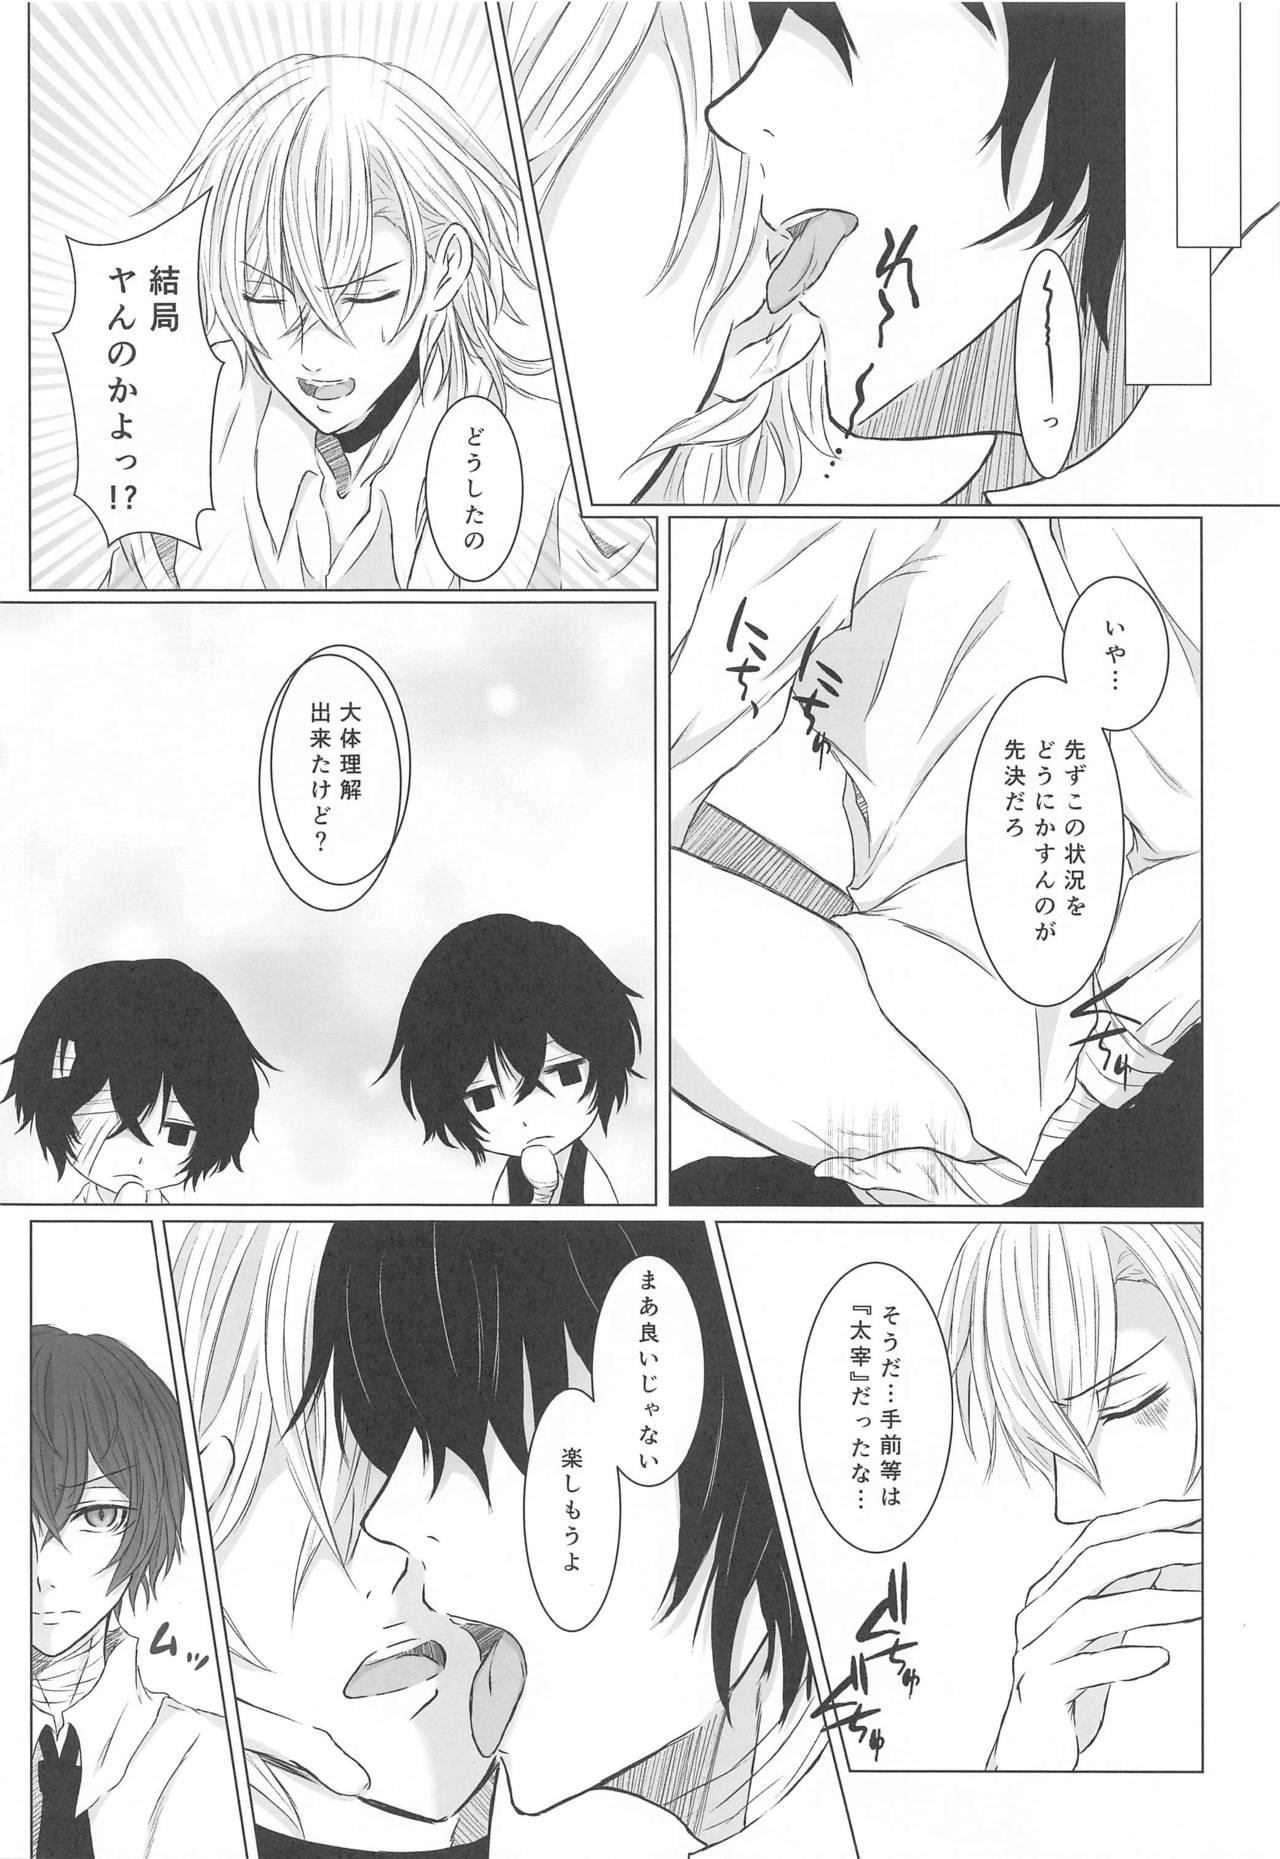 Tats Aibou Sand - Bungou stray dogs Swinger - Page 7